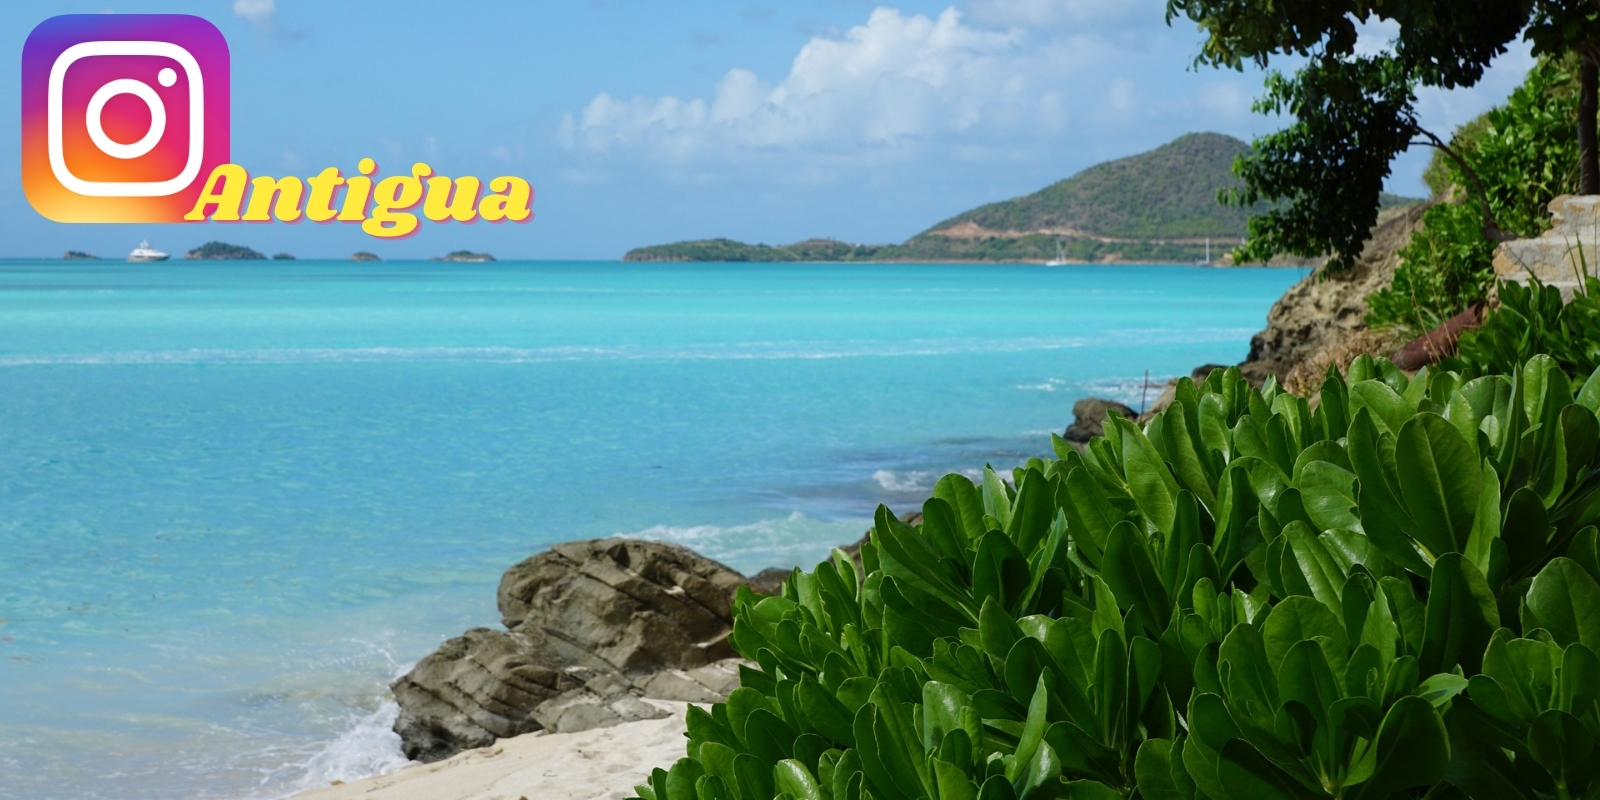 Travel blog: 6 of the Most Instagrammable Beaches in Antigua